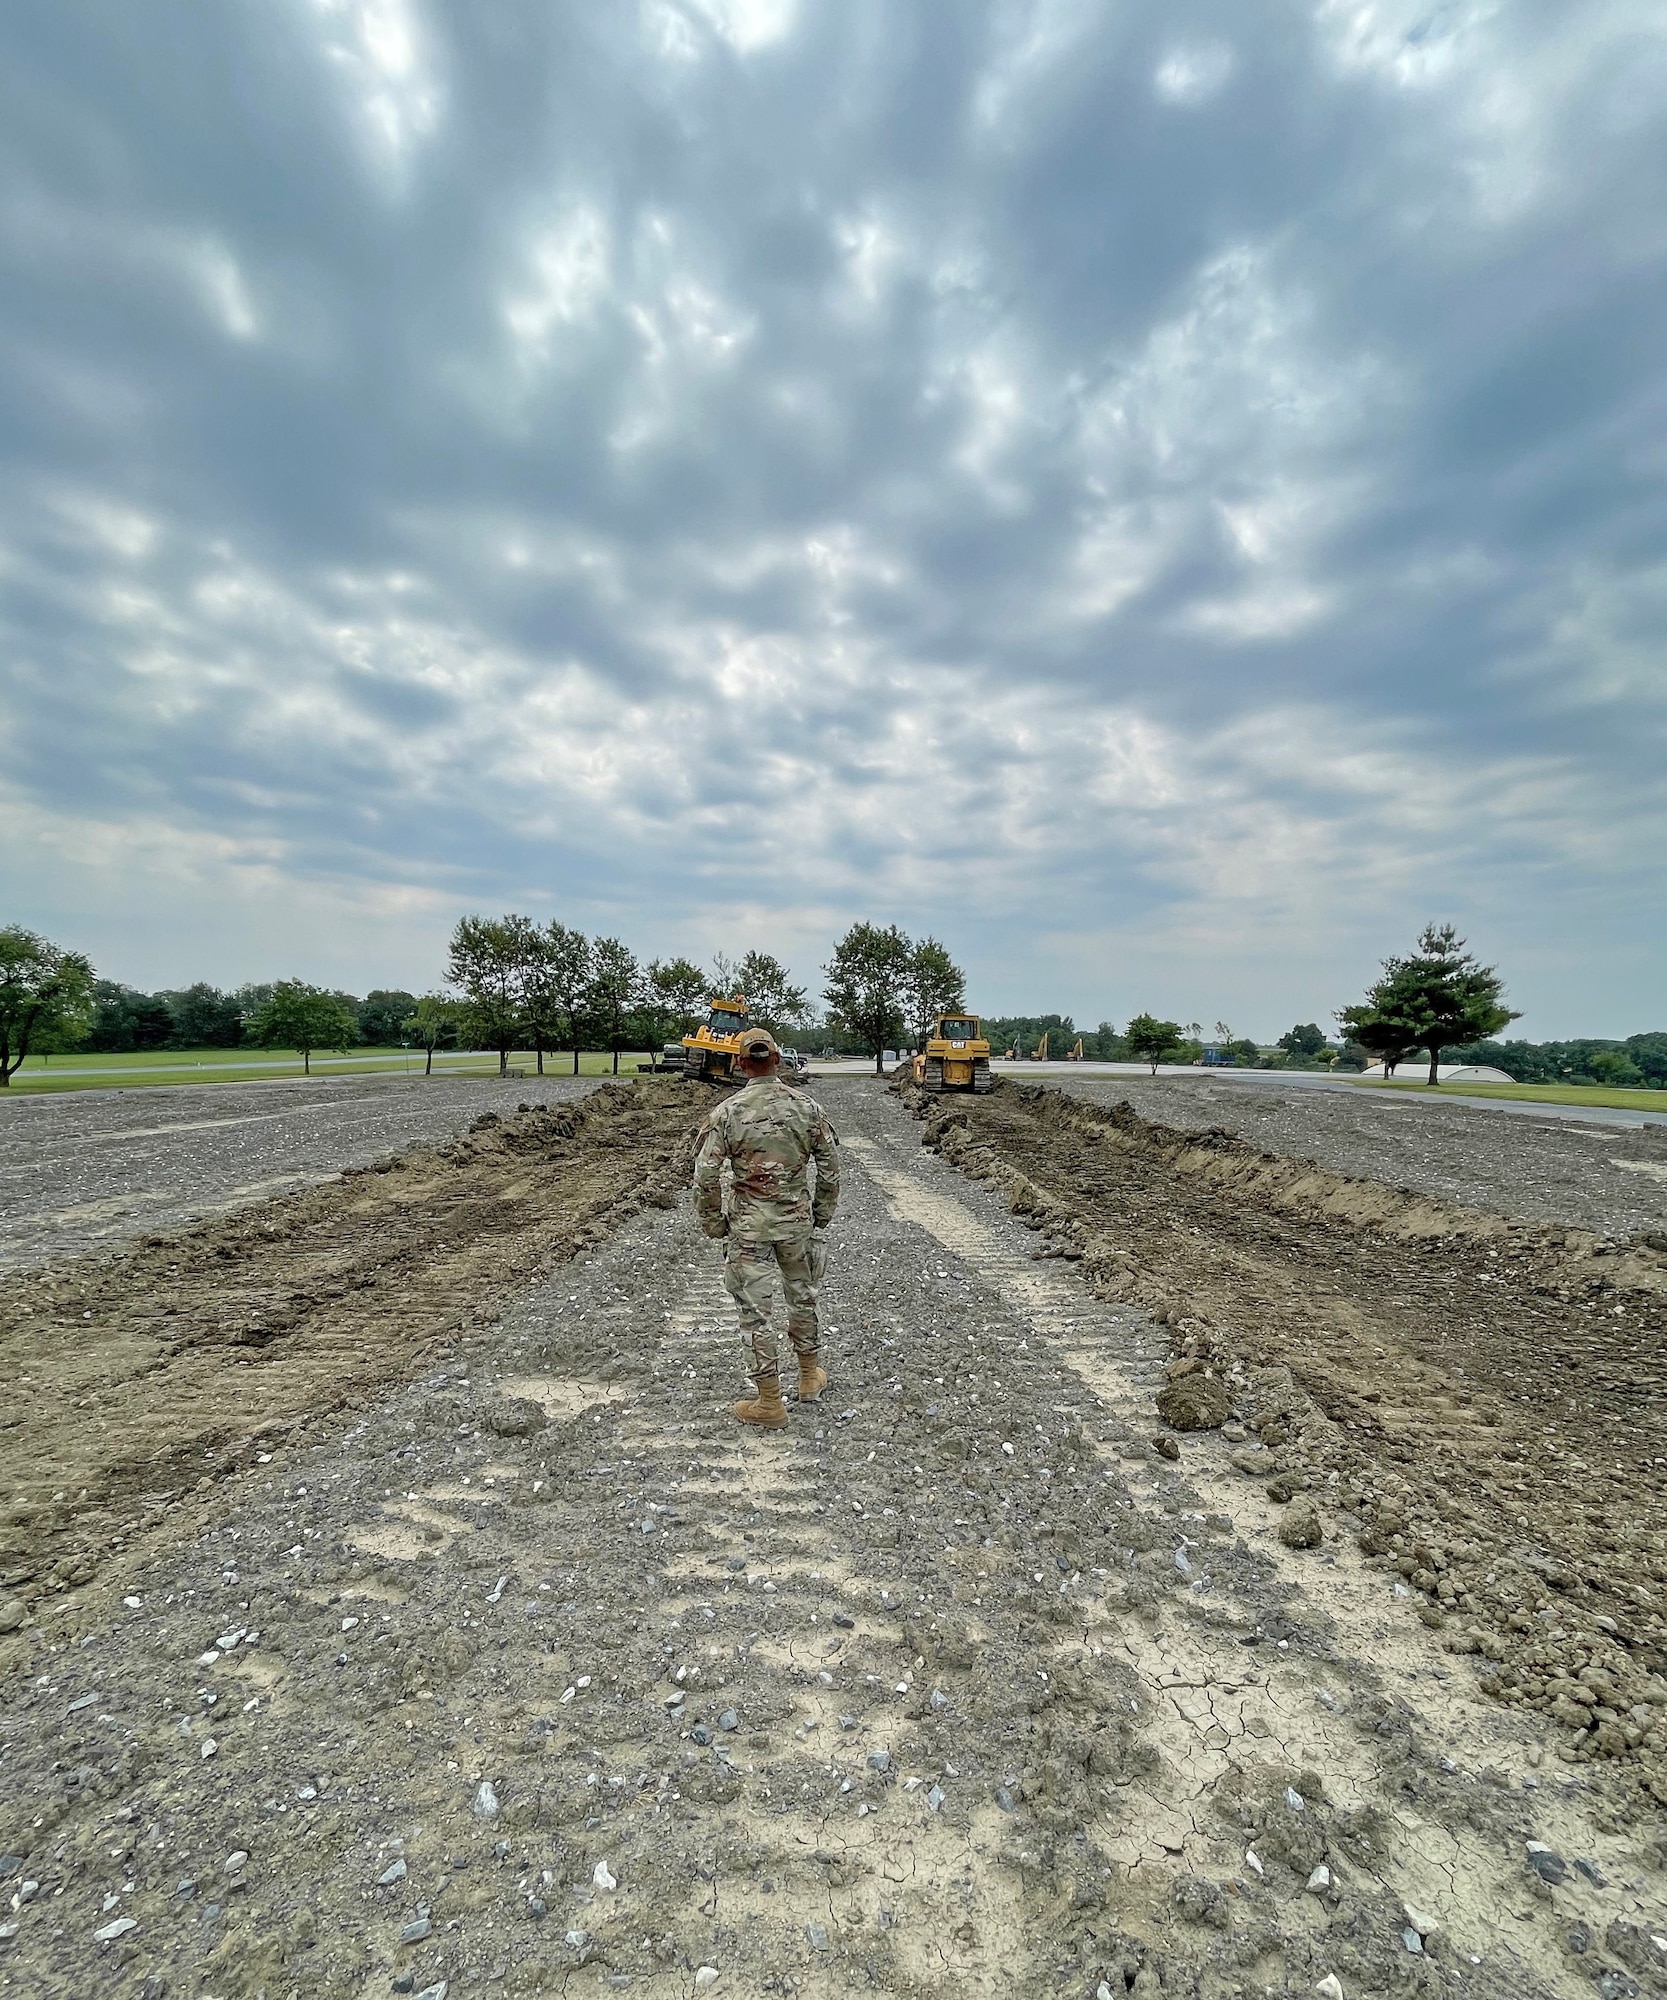 U.S. Air Force Tech. Sgt. Brandon Askew, a heavy equipment journeyman assigned to the 175th Civil Engineer Squadron, Maryland Air National Guard, observes 175th Wing Airmen training on heavy equipment at Ft. Indiantown Gap, Pennsylvania, June 22, 2022.